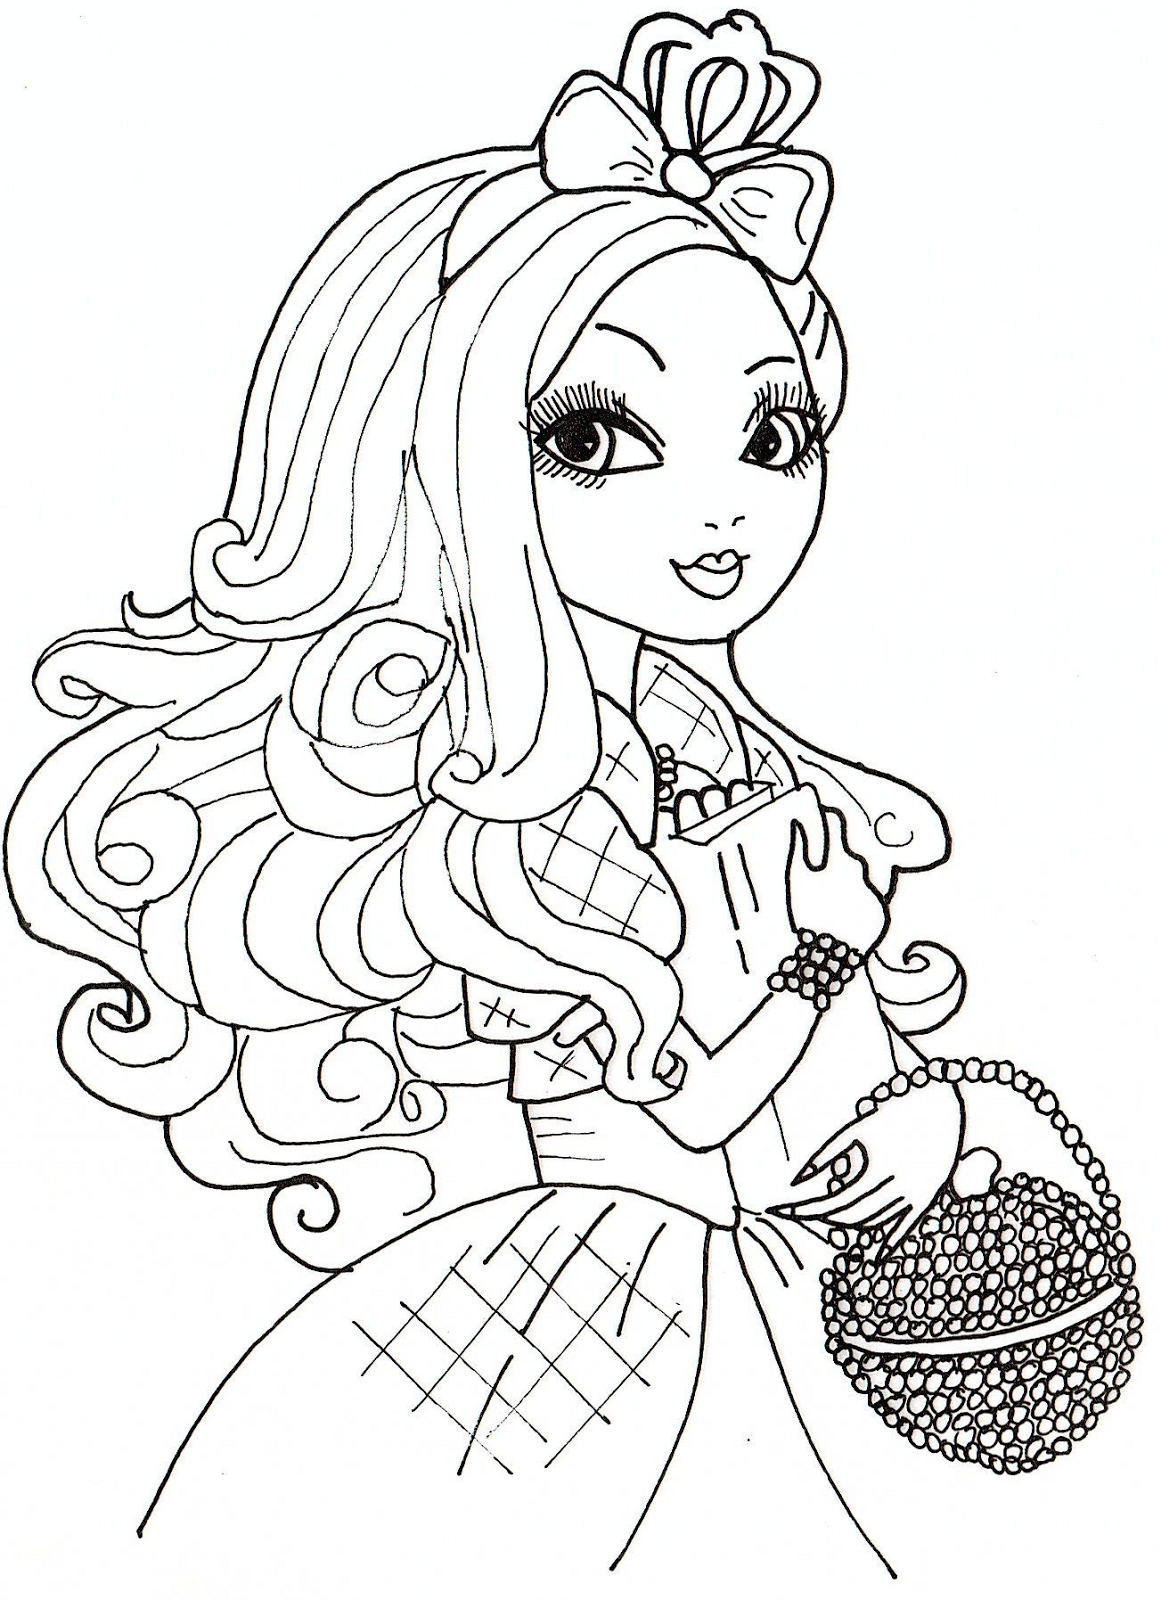 Free Printable Ever After High Coloring Pages: Apple White